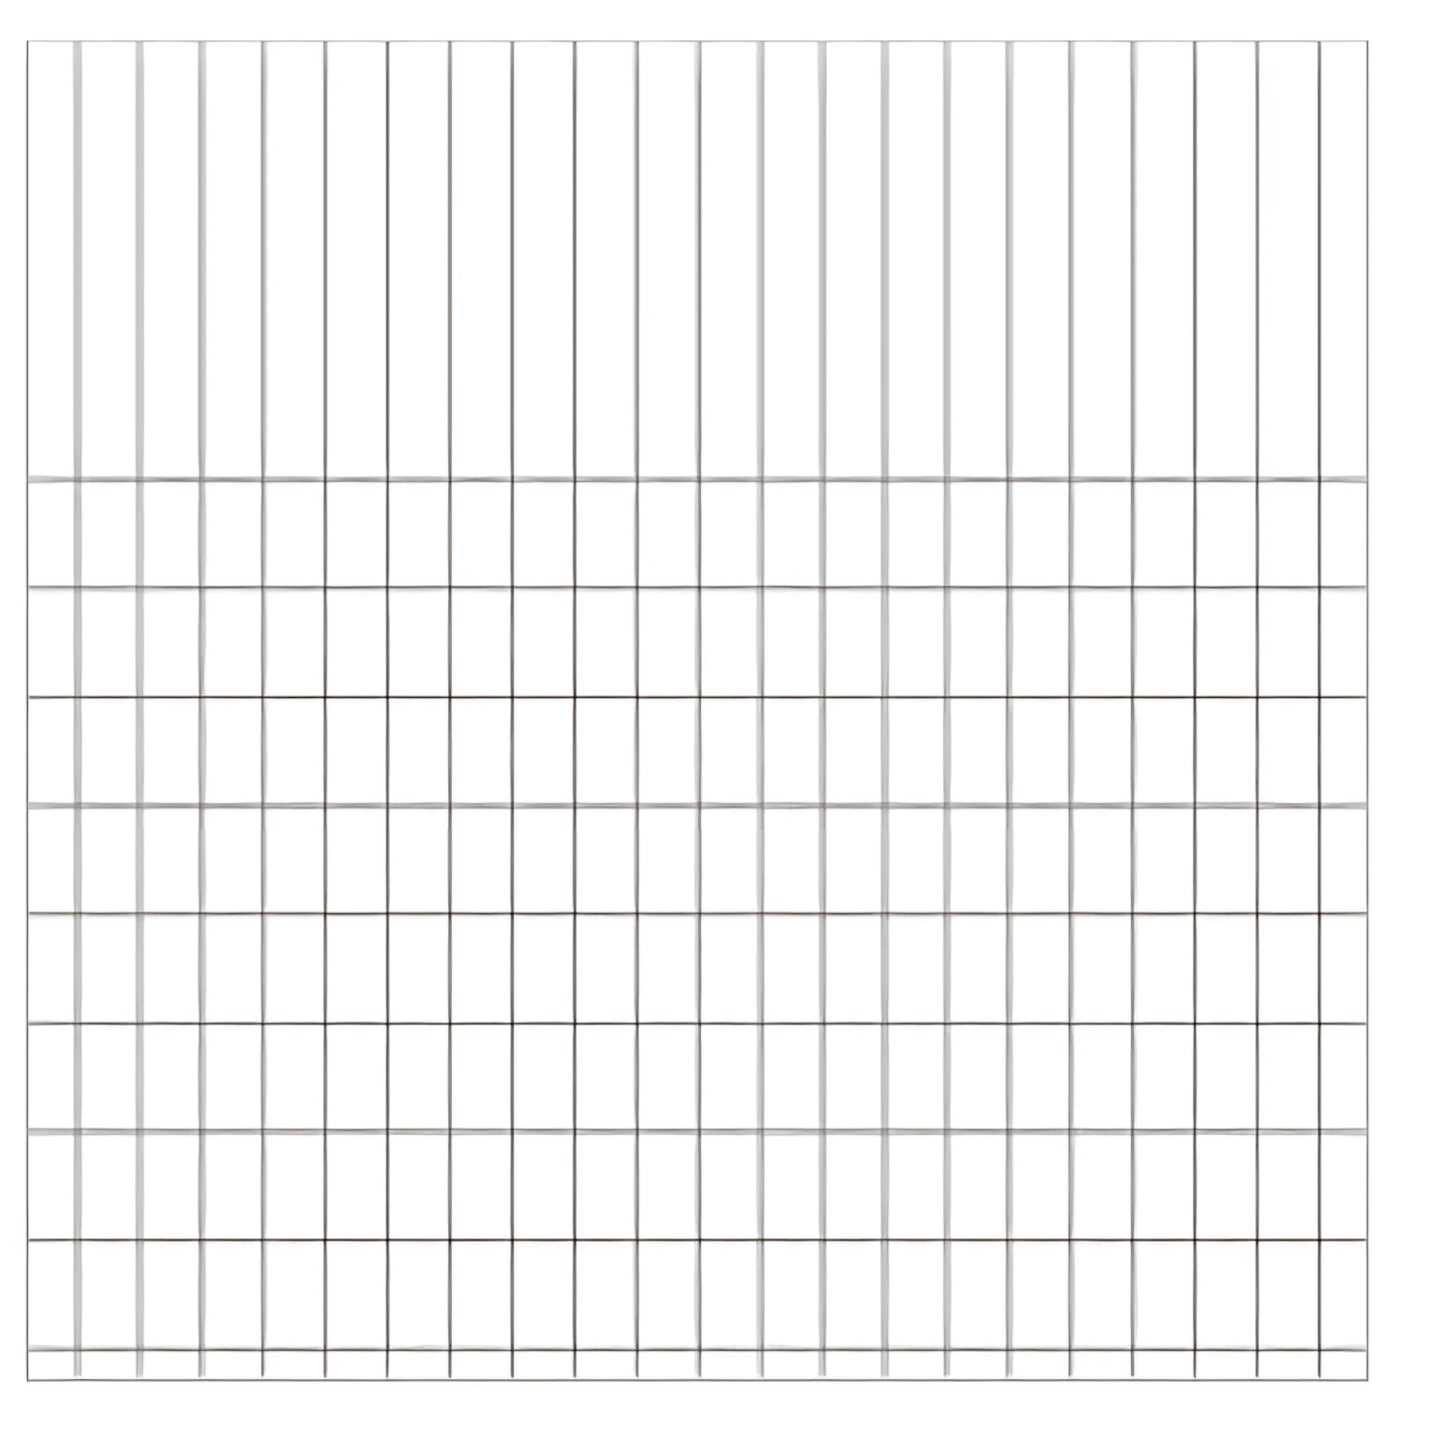 Woodless Graph Paper, 4x7mm (0.16”x 0.28”) Loose Sheets (Accounting Style)